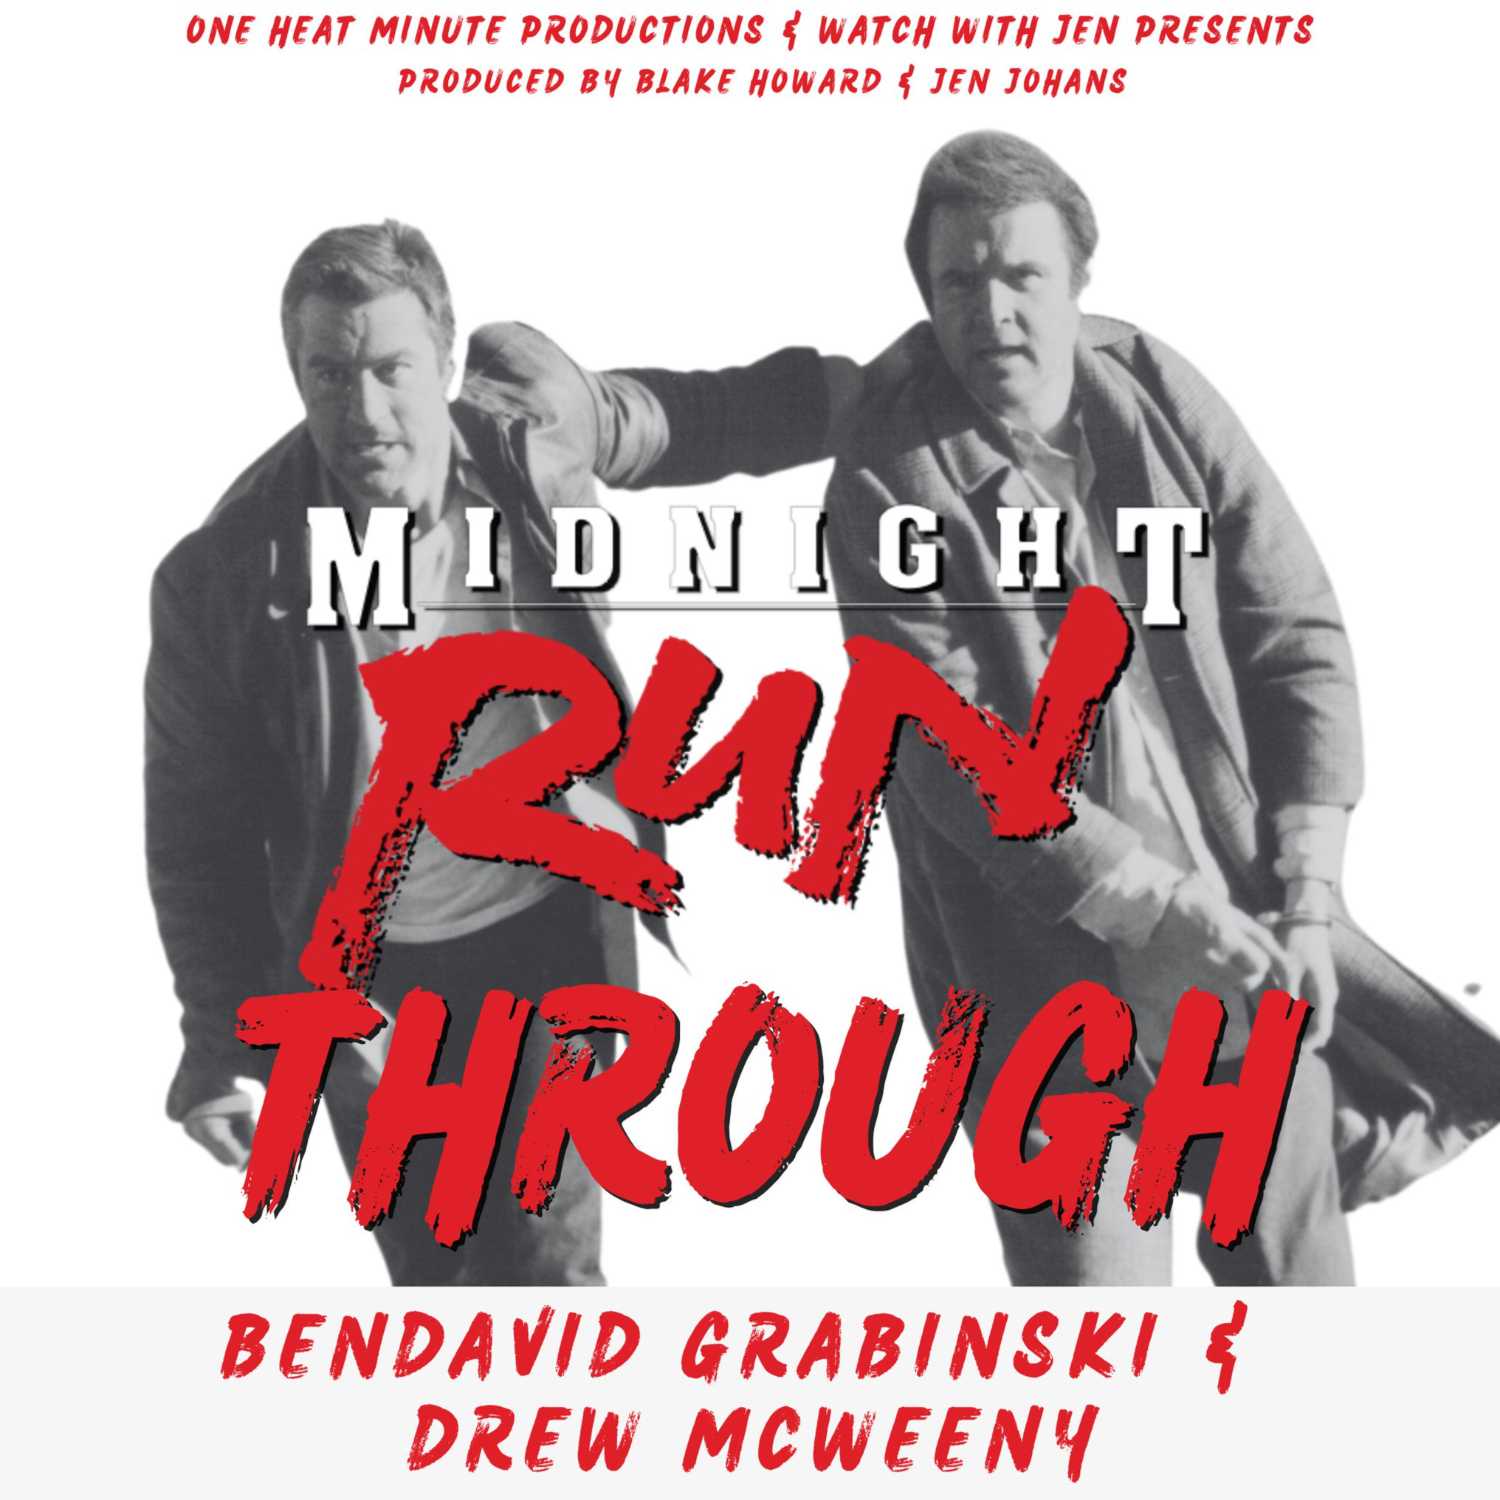 MIDNIGHT RUN-THROUGH - Episode 1 with BenDavid Grabinski & Drew McWeeny (From One Heat Minute Productions & Watch With Jen)